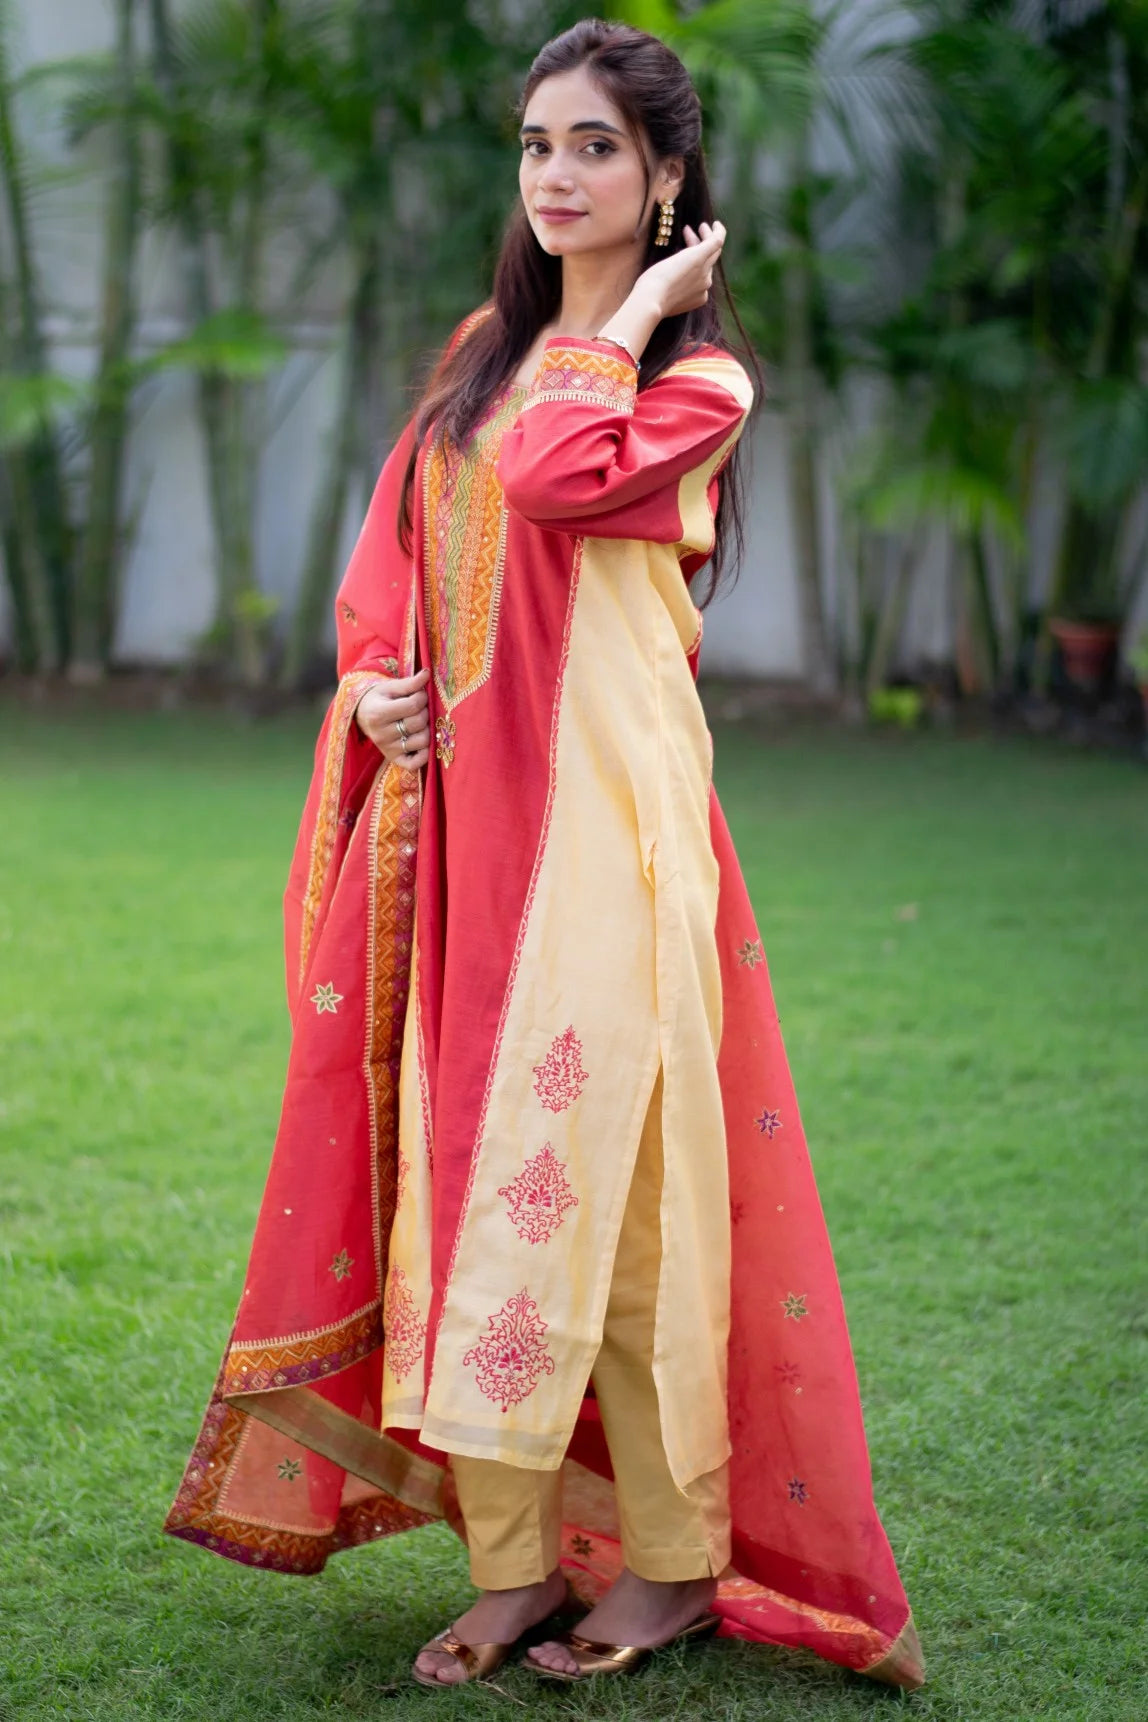 Premium Photo | Attractive young girl wearing yellow embroidery shalwar  kameez standing in garden